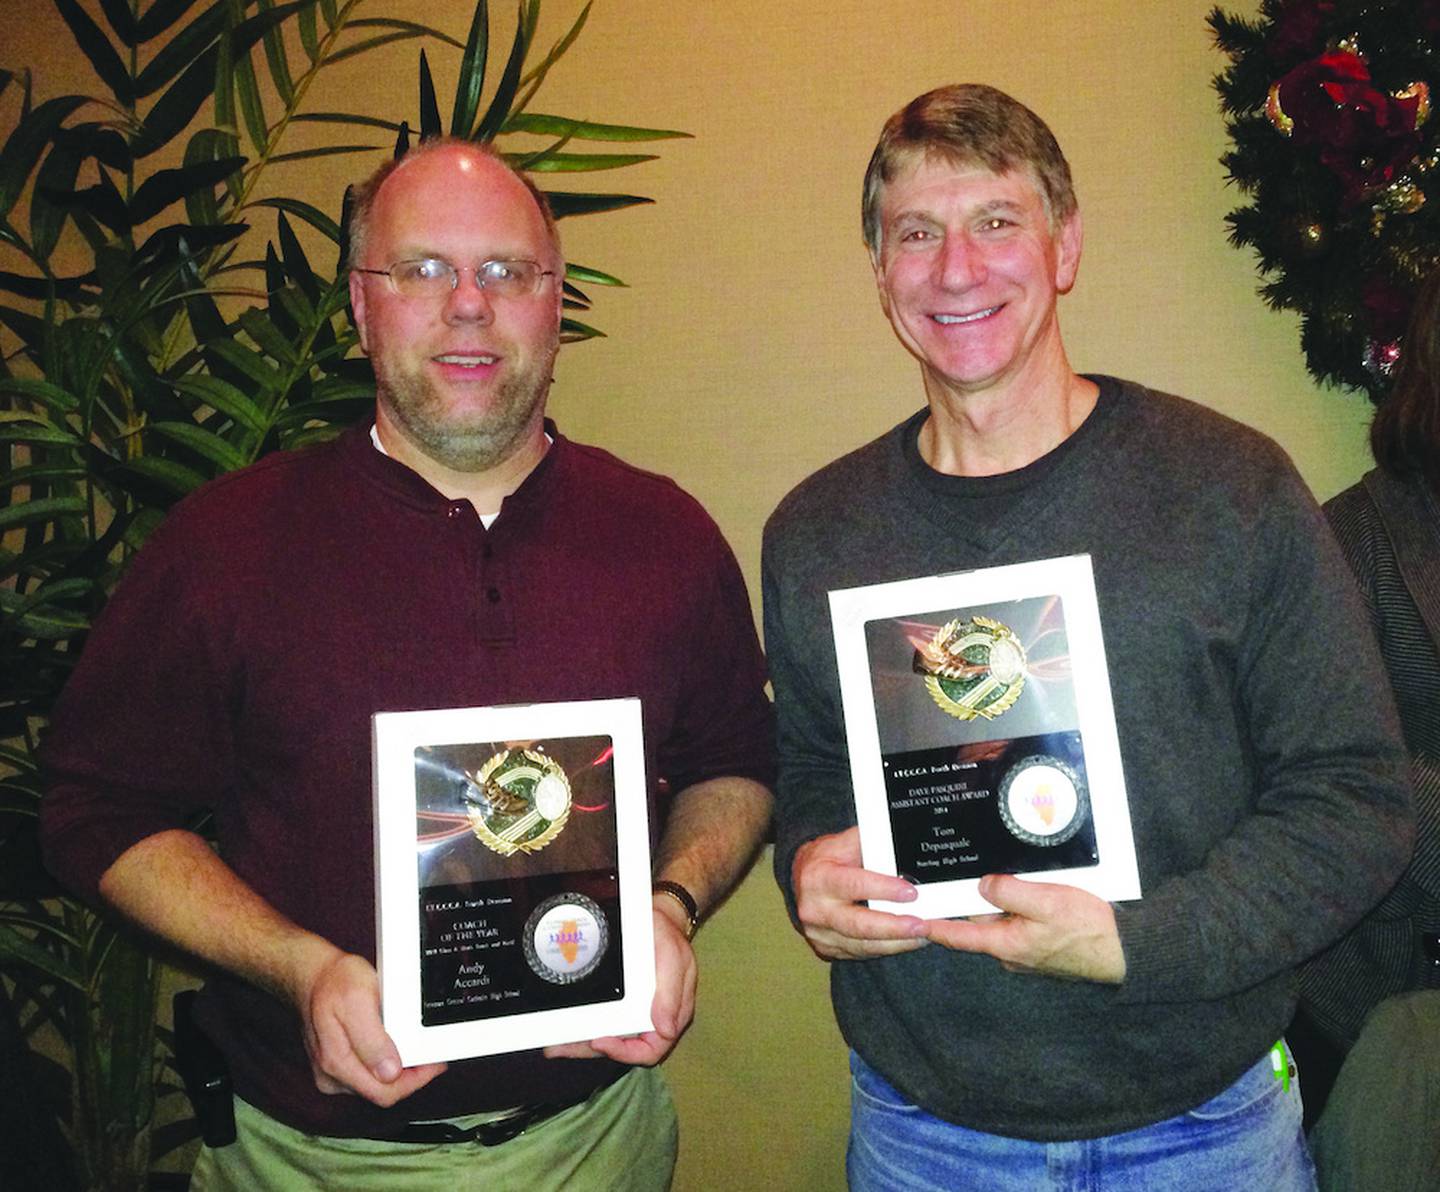 Newman boys track coach Andy Accardi (left) was named the Class 1A Coach of the Year by the Illinois Track & Cross Country Coaches’ Association for 2013, while Sterling assistant Tom DePasquale was one of three assistant coaches of the year.